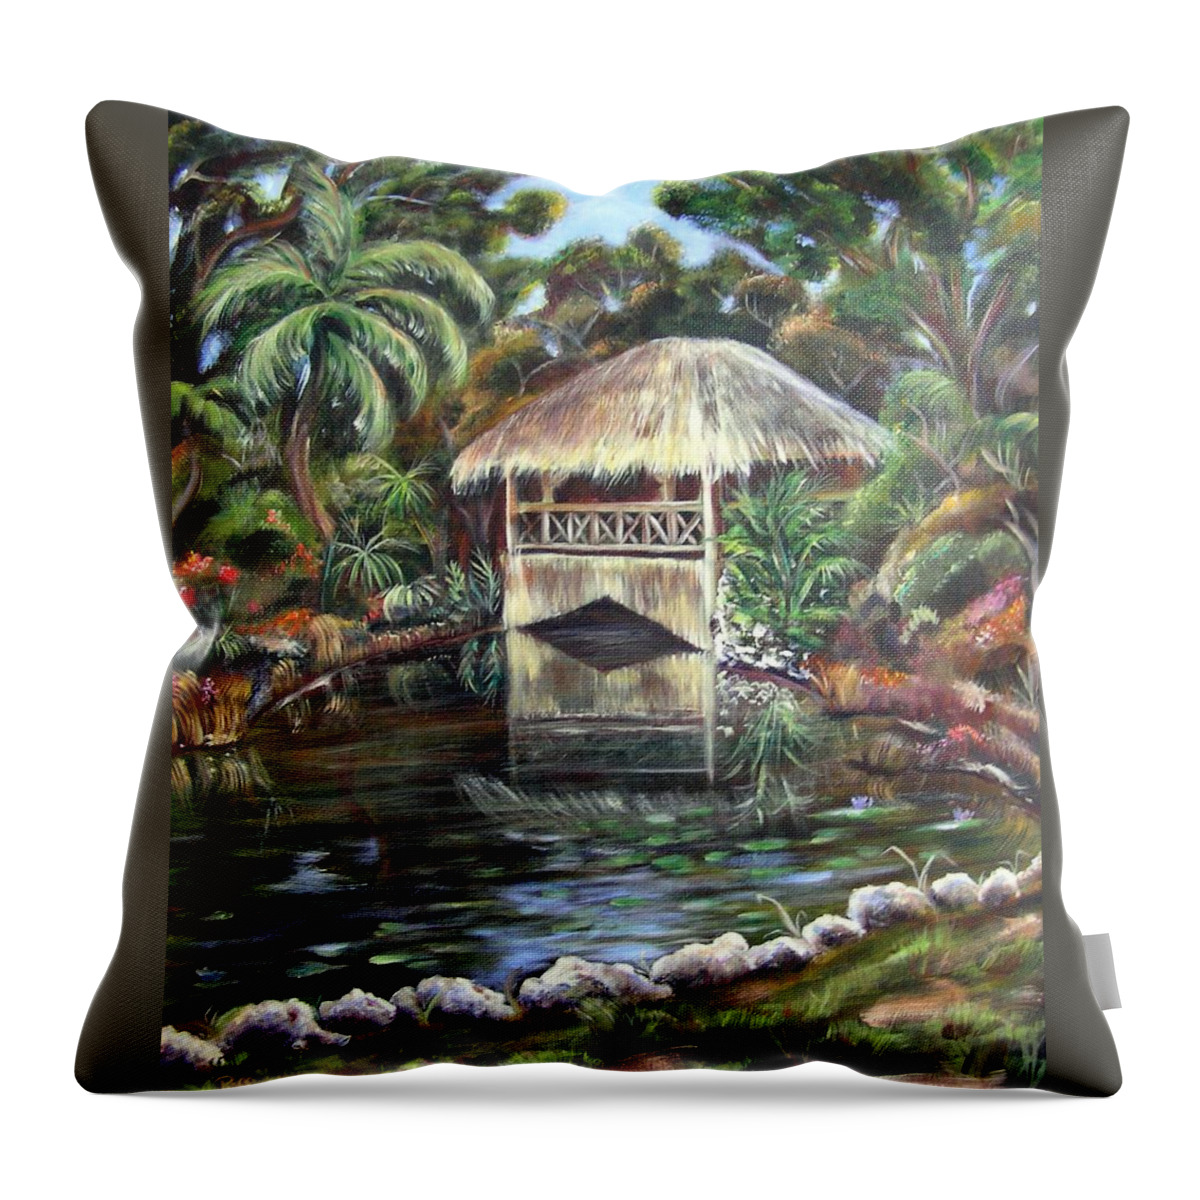 Bonnet House Throw Pillow featuring the painting Bonnet House Chickee by Patricia Piffath